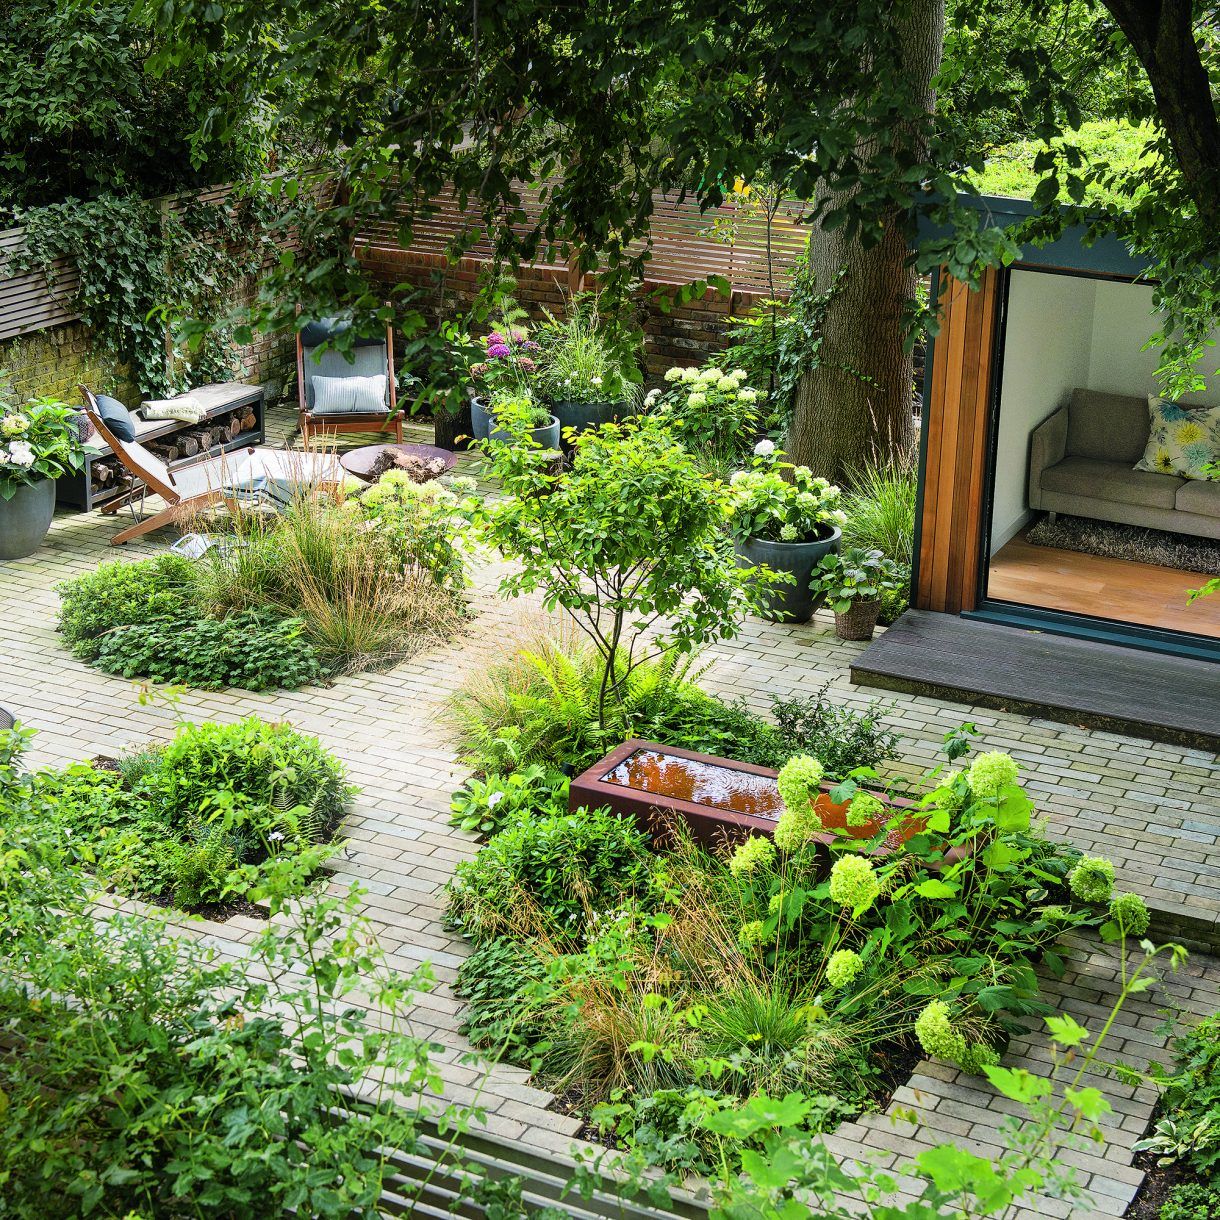 Creating Intimate and Functional Garden Designs